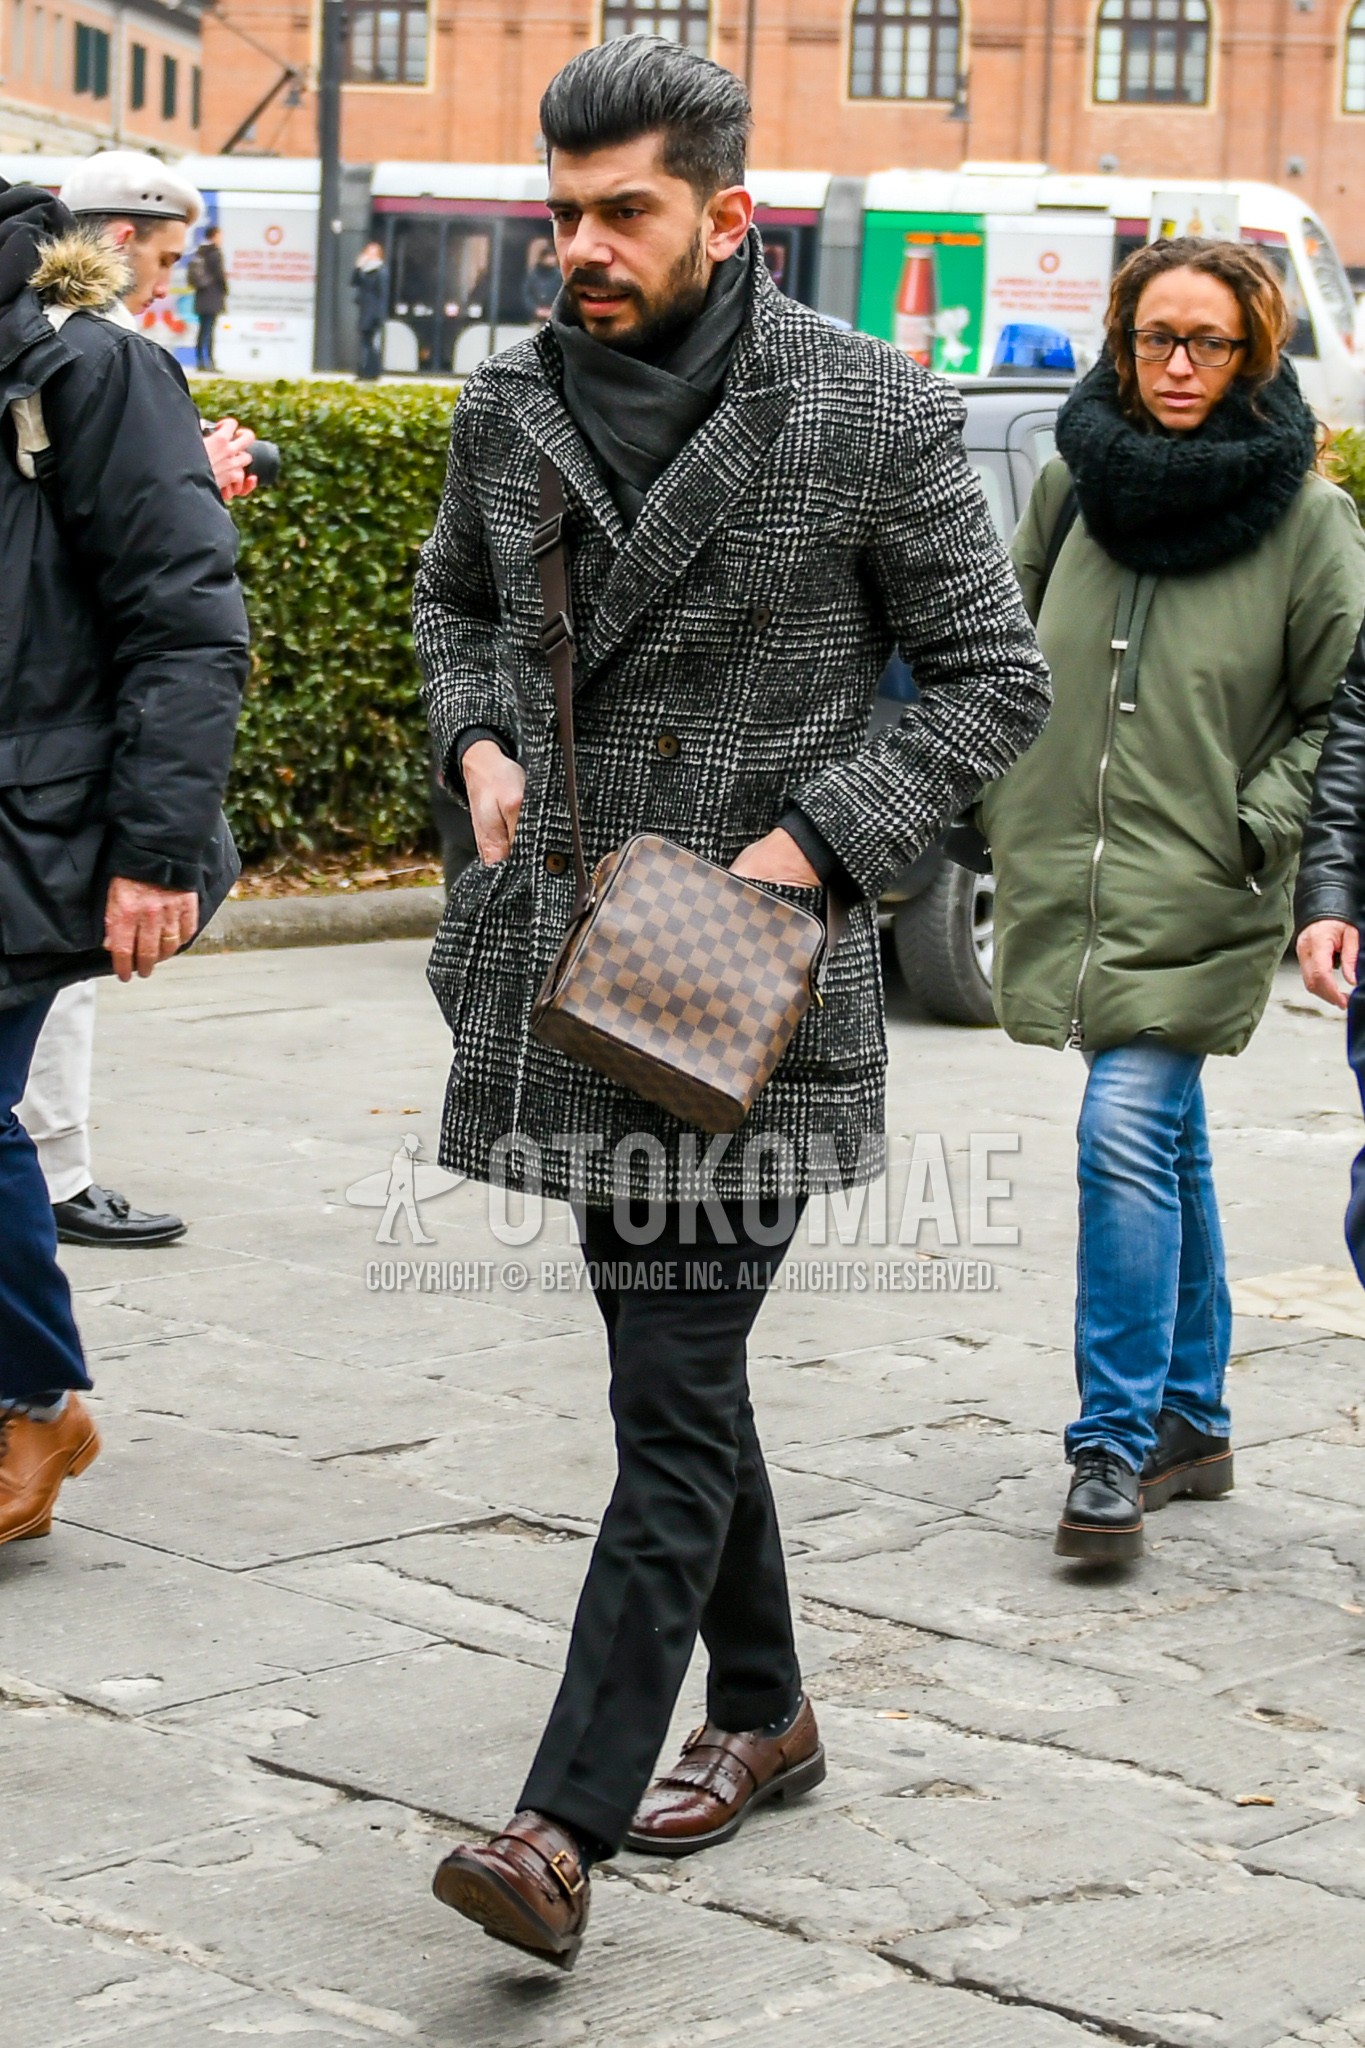 Men's autumn winter outfit with gray plain scarf, gray check chester coat, dark gray plain slacks, black dots socks, brown monk shoes leather shoes, brown check shoulder bag.